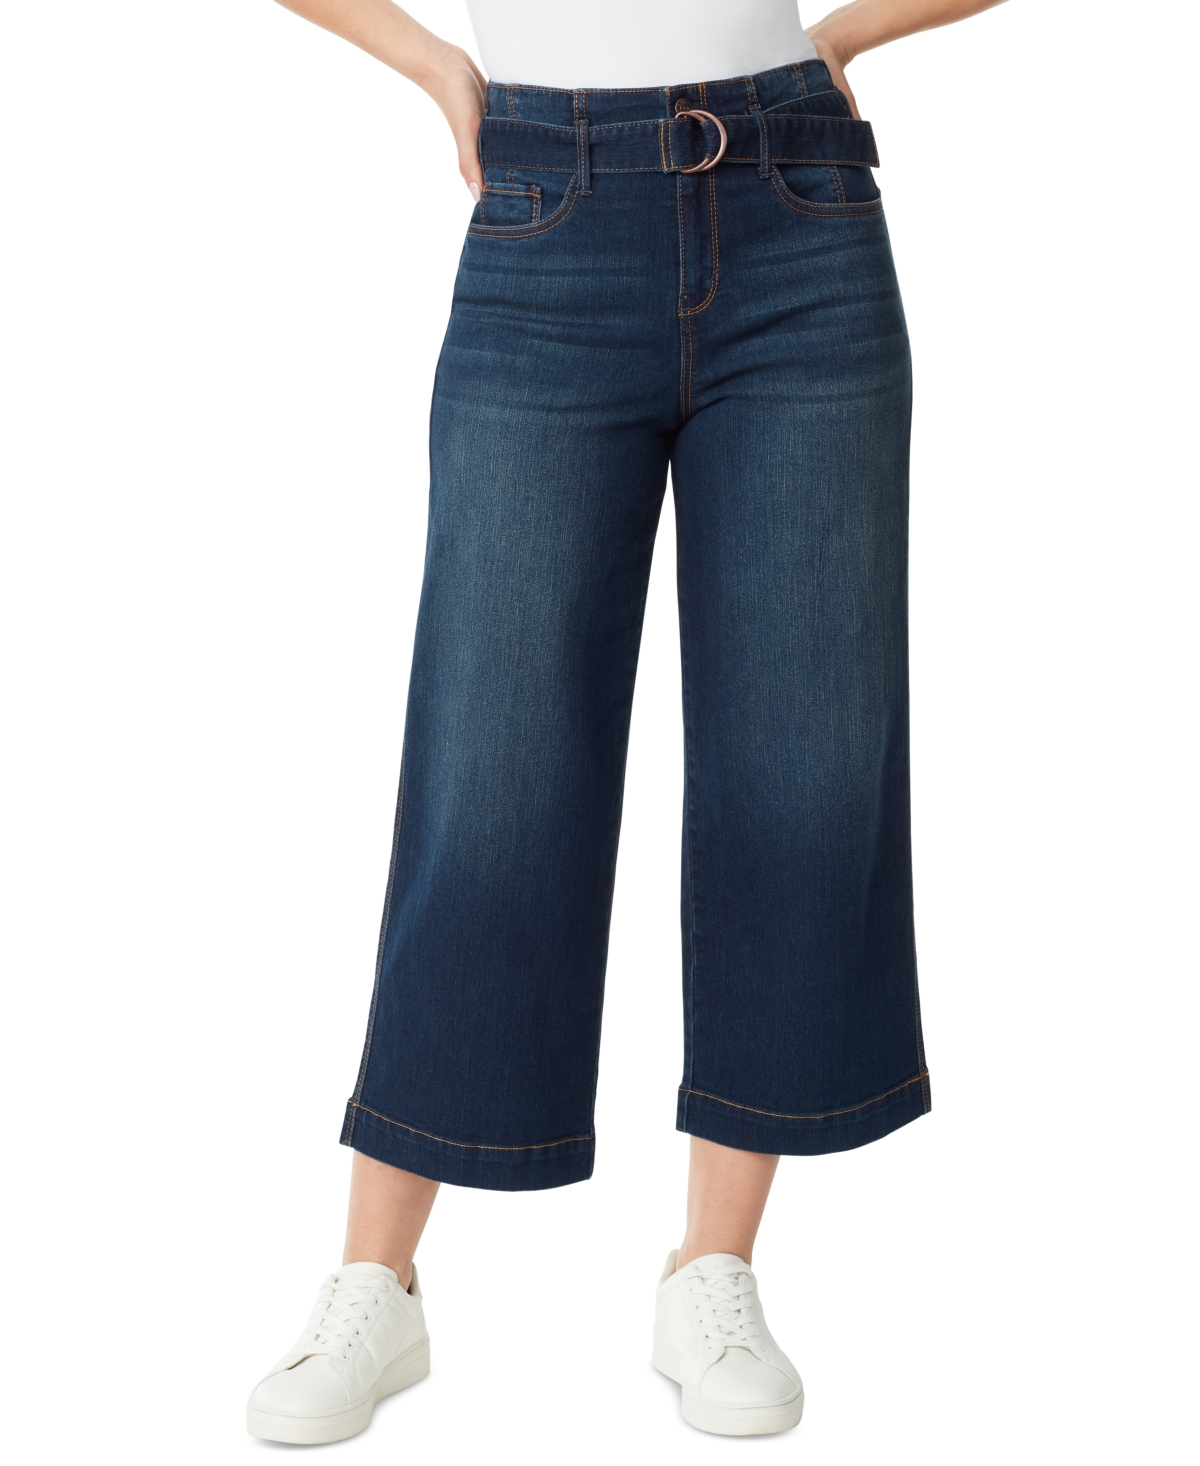 Women's Cropped Wide-Leg Belted Jeans - Caraway Wash